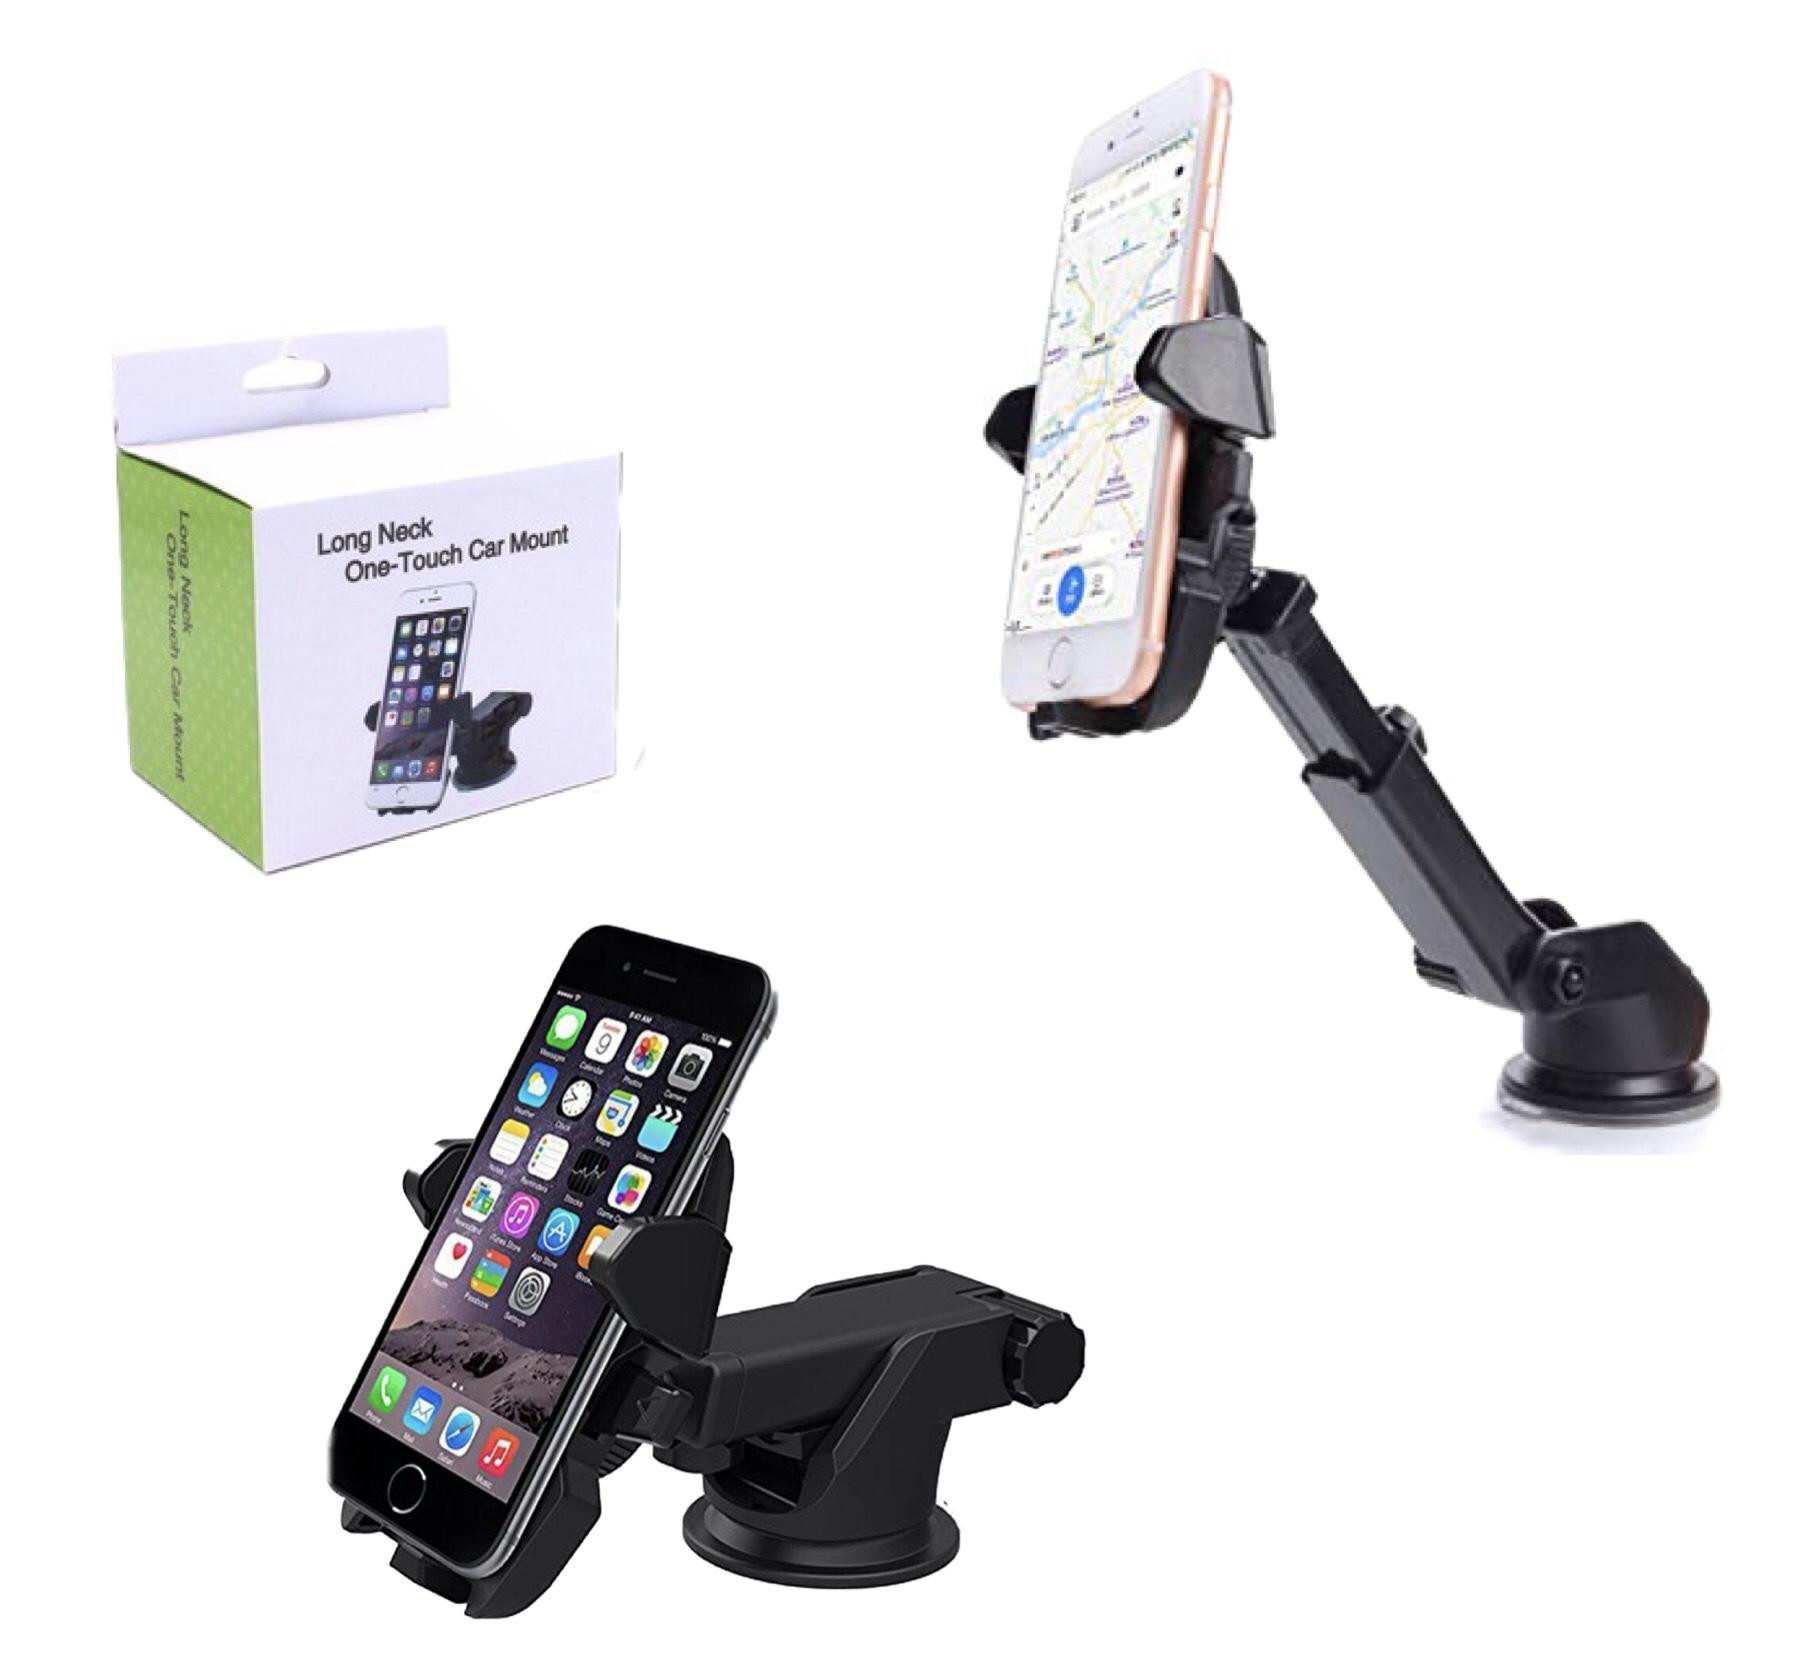 Long Neck-One Touch Car Mount Mobile Holder